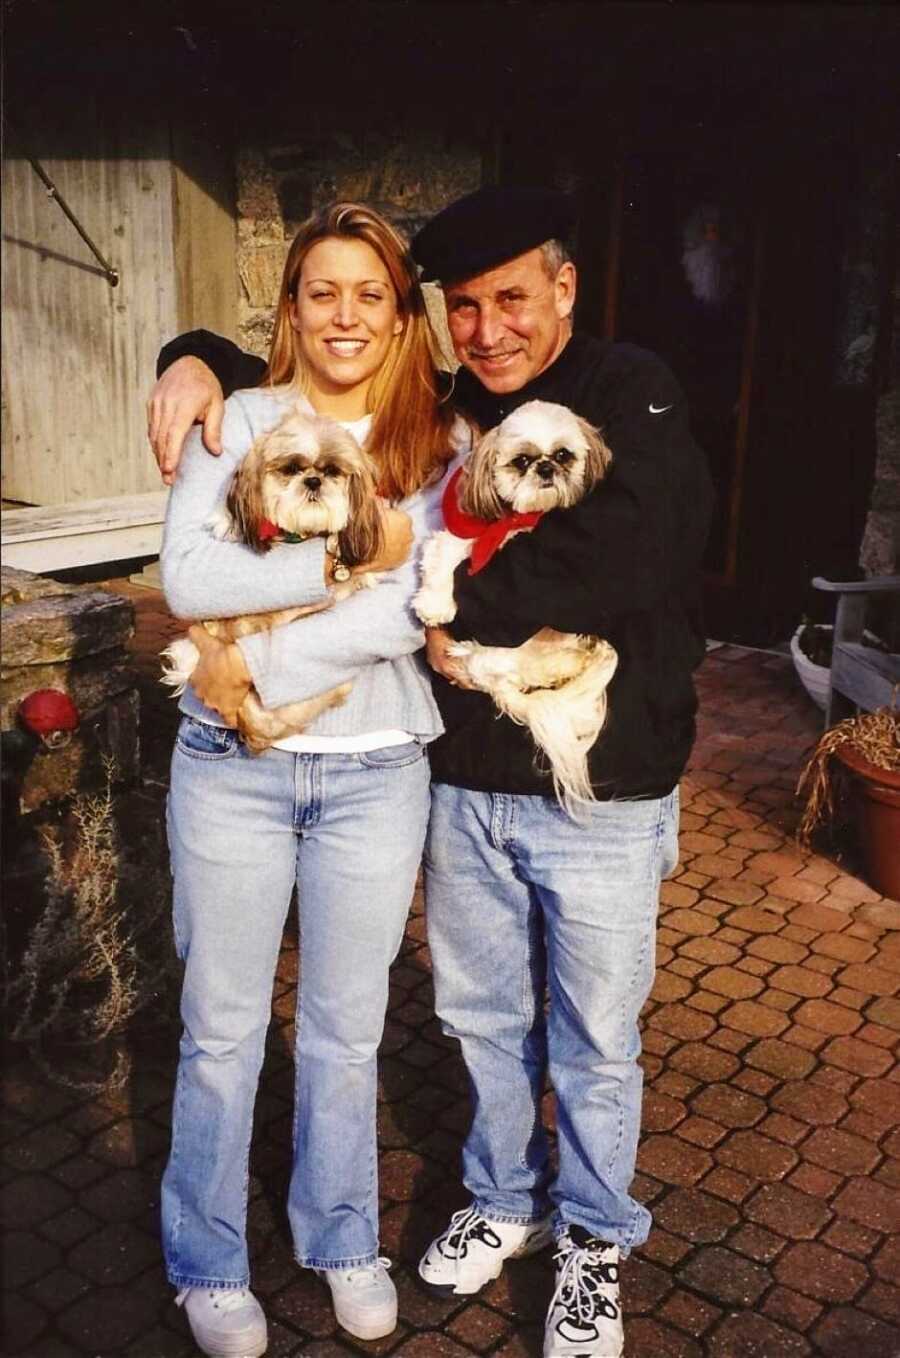 Father and daughter take a photo together, both wearing sweaters and jeans and holding dogs